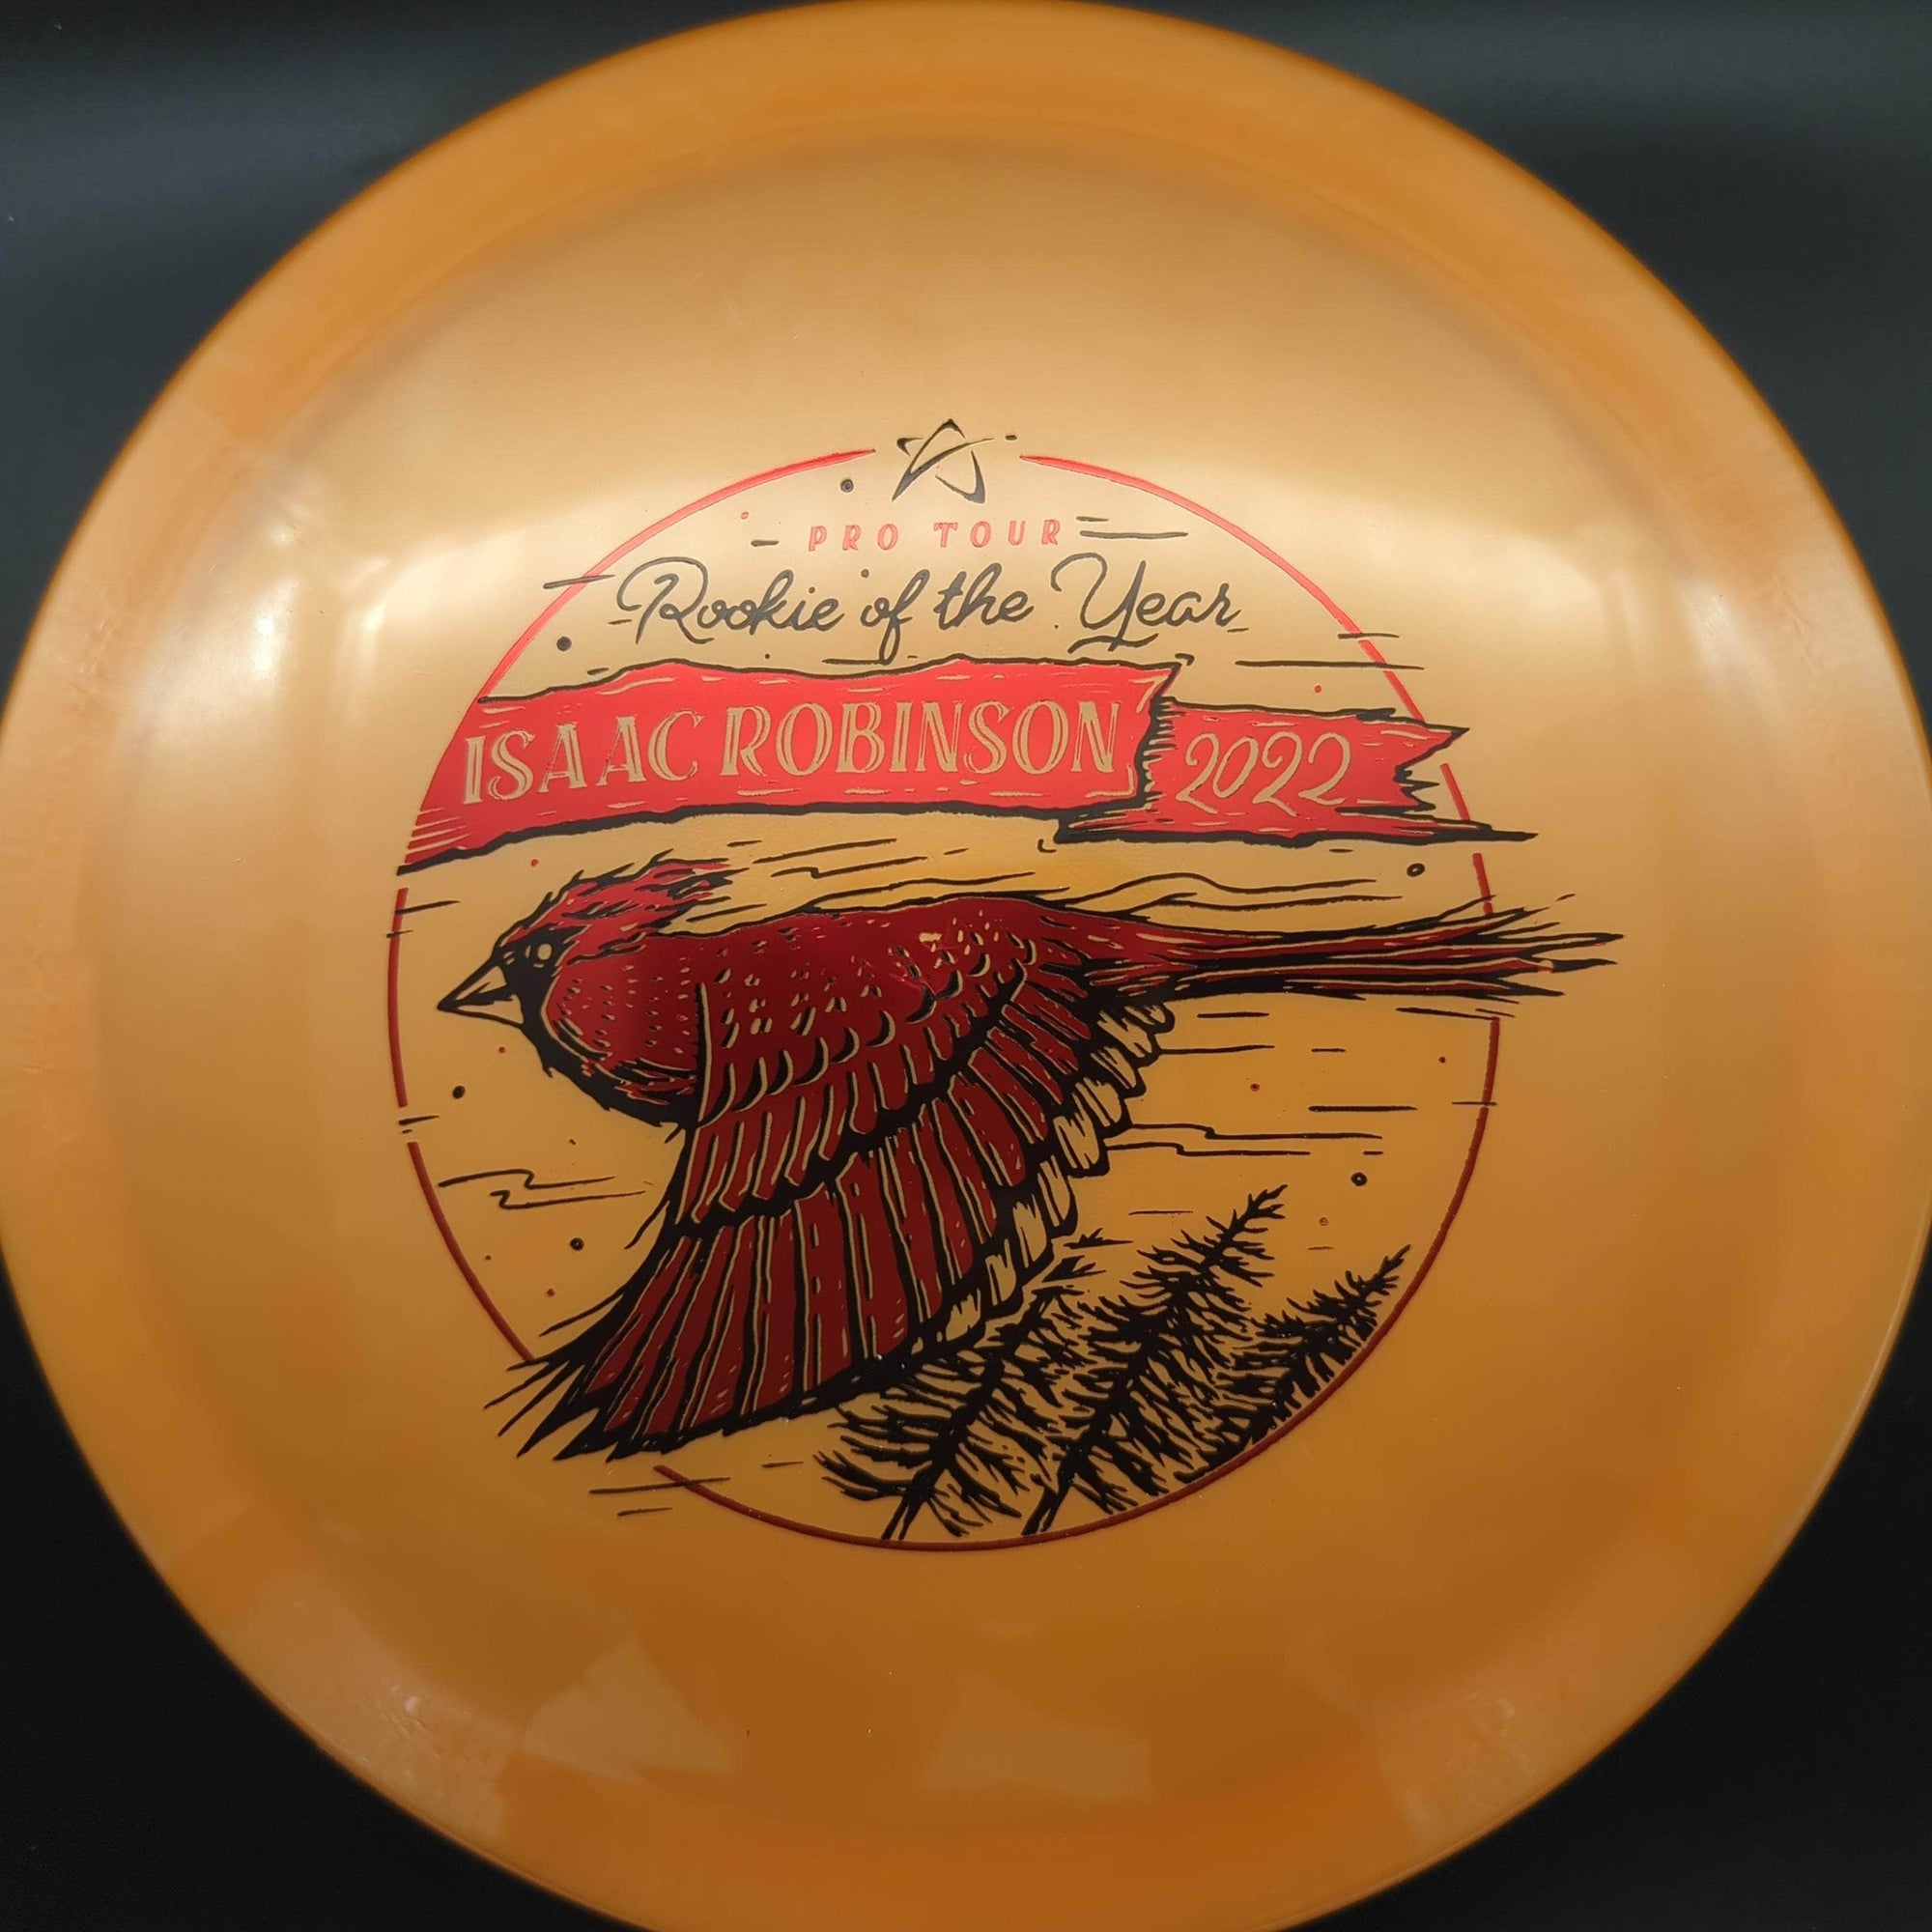 Prodigy Fairway Driver Fx4, 500 Plastic, Isaac Robinson Rookie Of the Year Stamp